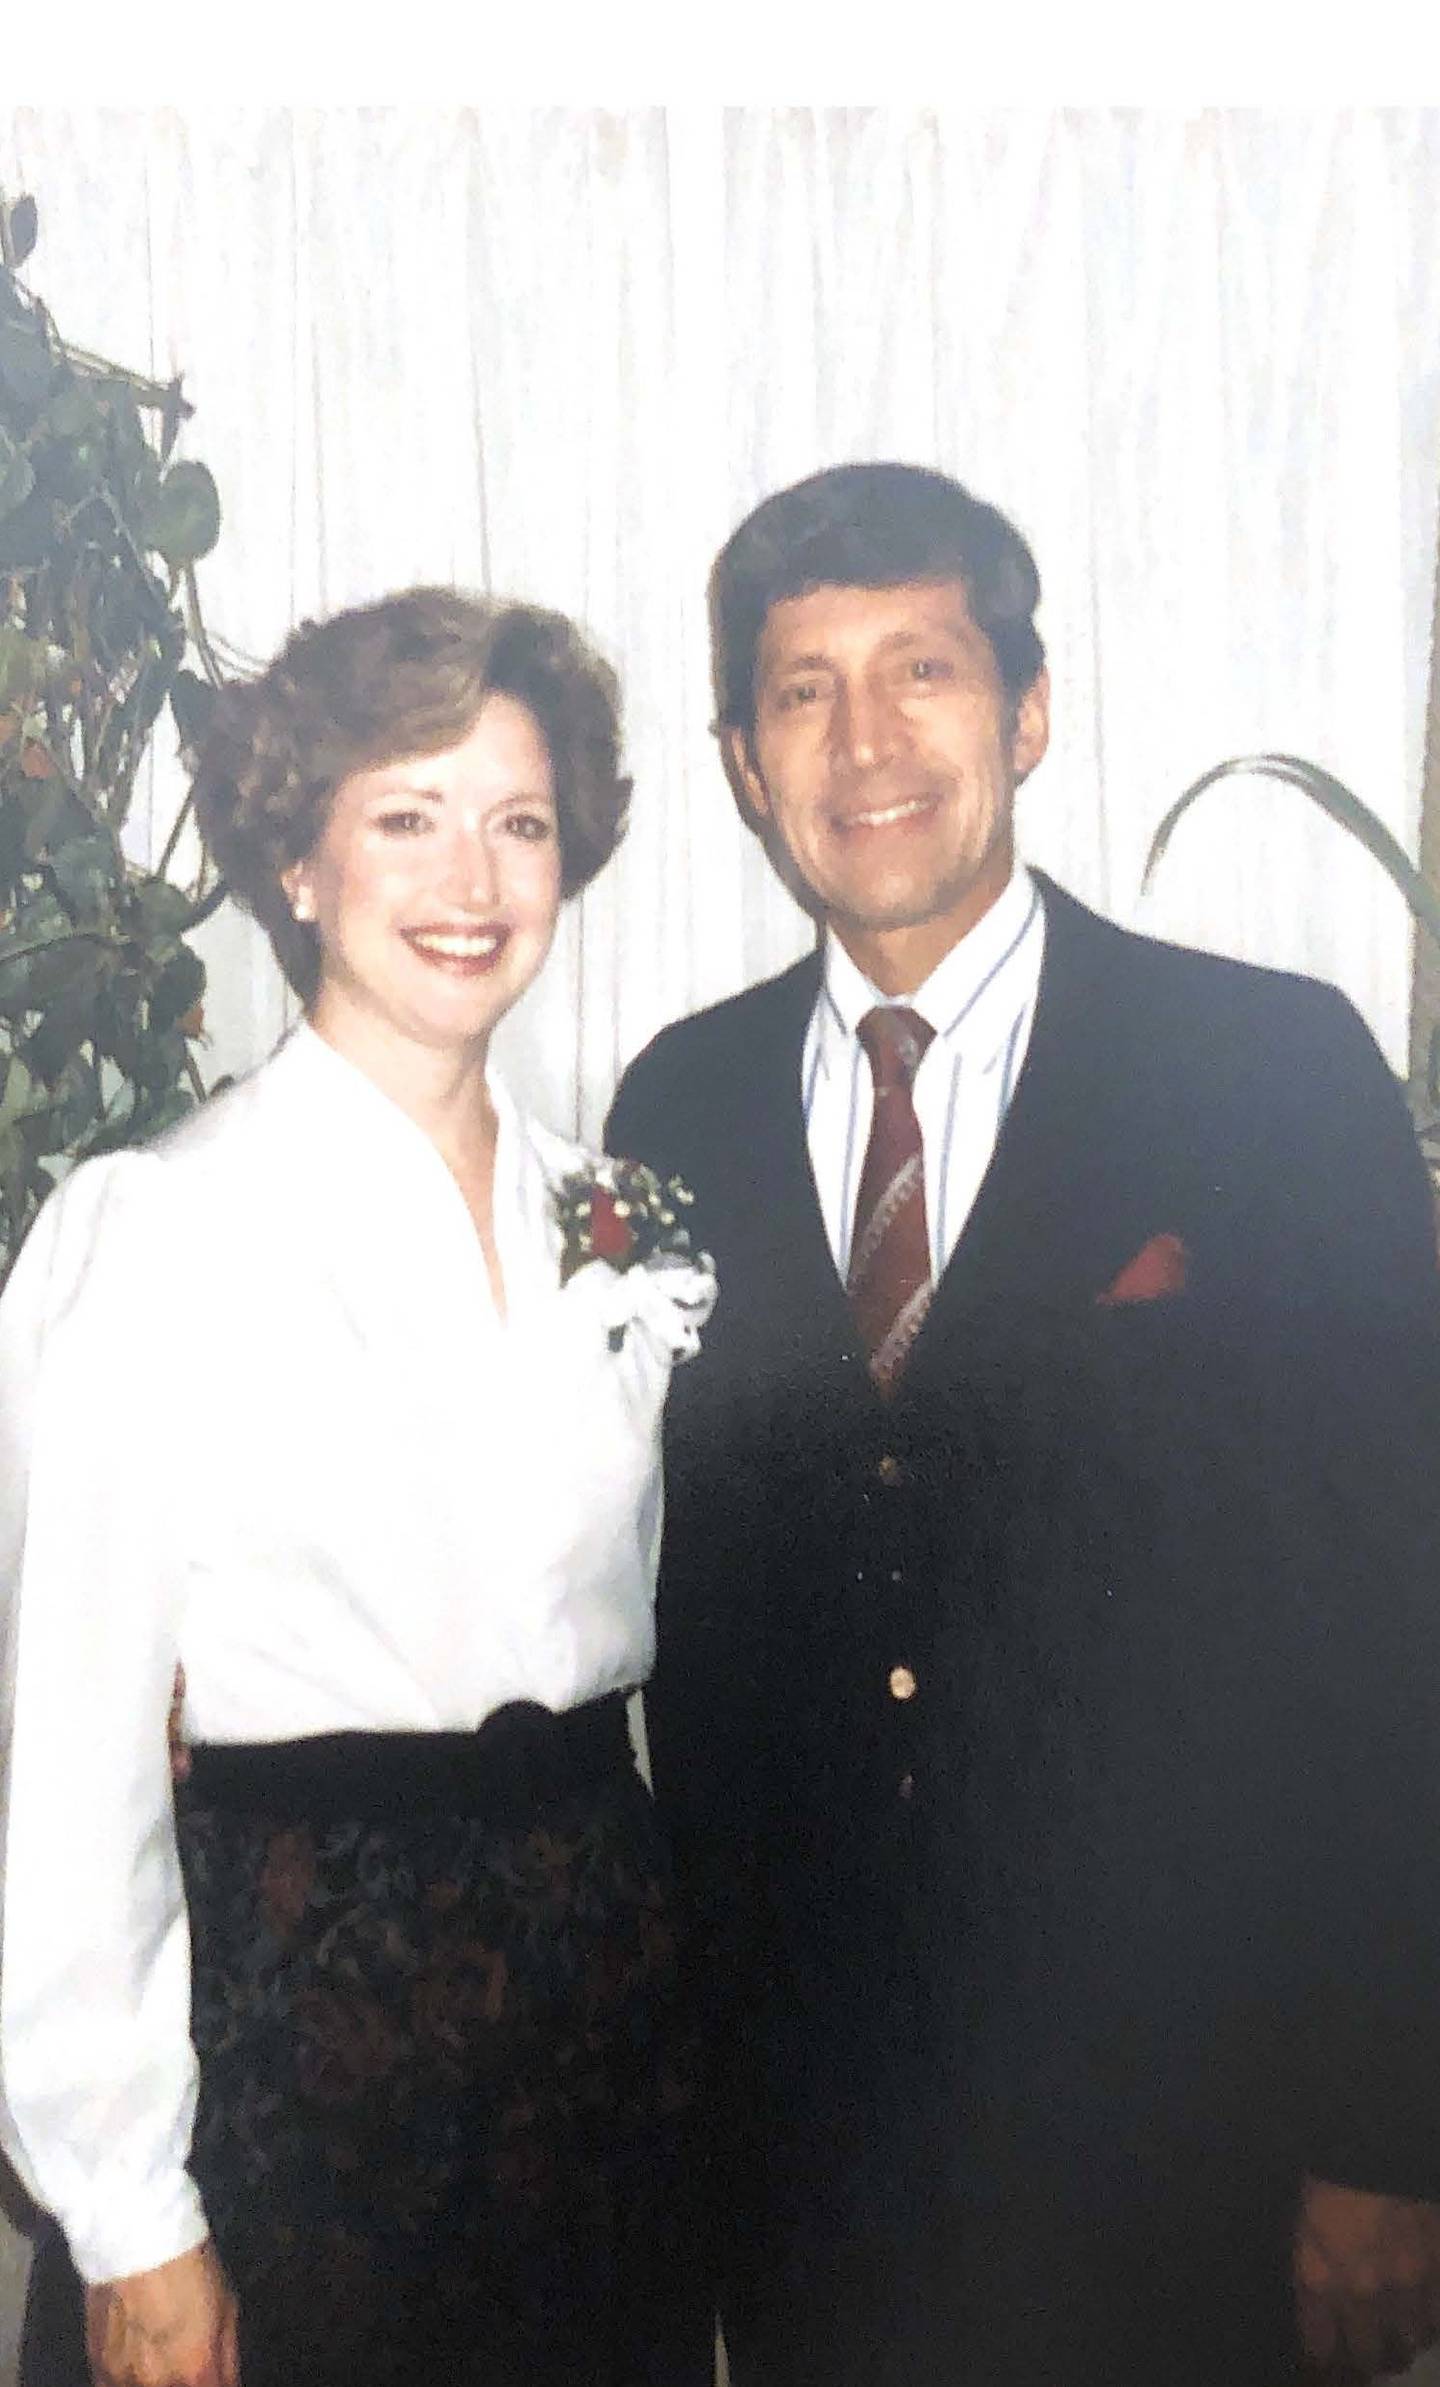 Robert “Bob” Gutierrez, formerly of Joliet and Shorewood and later Orland Park, was known for his faith, frugality, wit, kindness and strength. His wife Barbara Jean said she never heard him say anything negative about anyone.